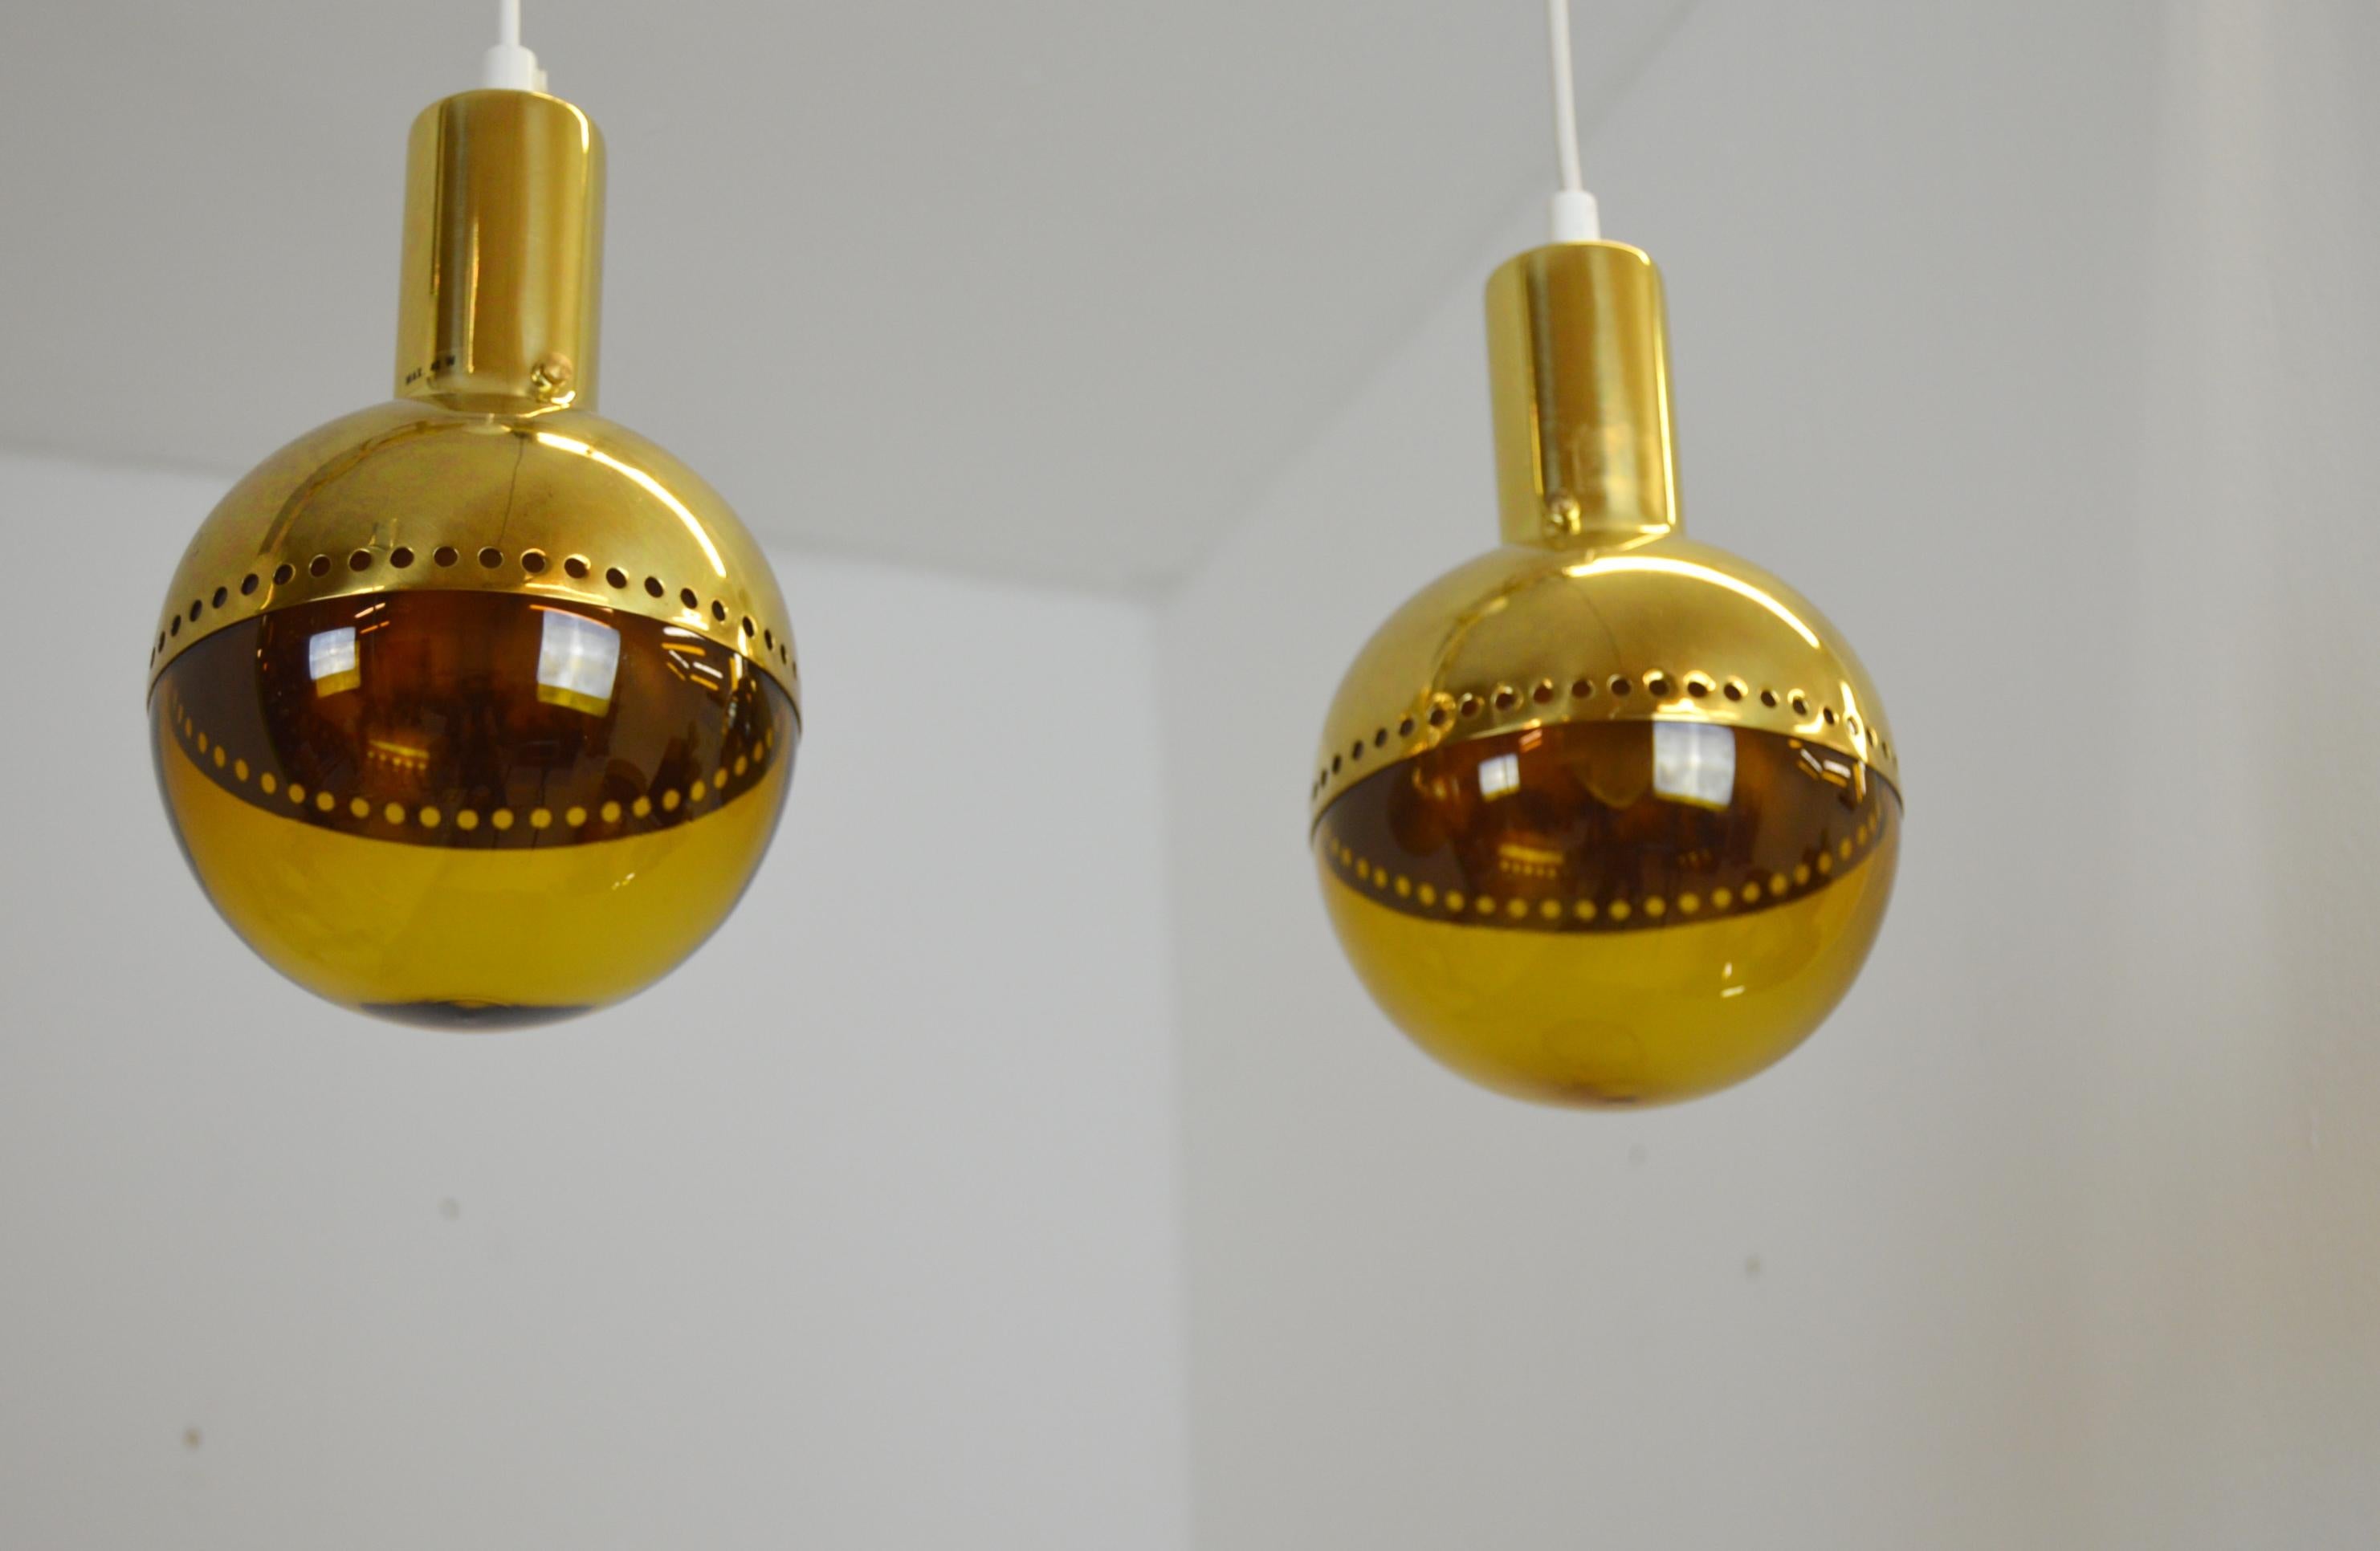 A set of two exclusive Patricia ceiling or window lamps designed and manufactured by Hans Agne Jakobsson in Markaryd, Sweden. 

Amber colored glass and brass. The height below is stated without the electrical cord.